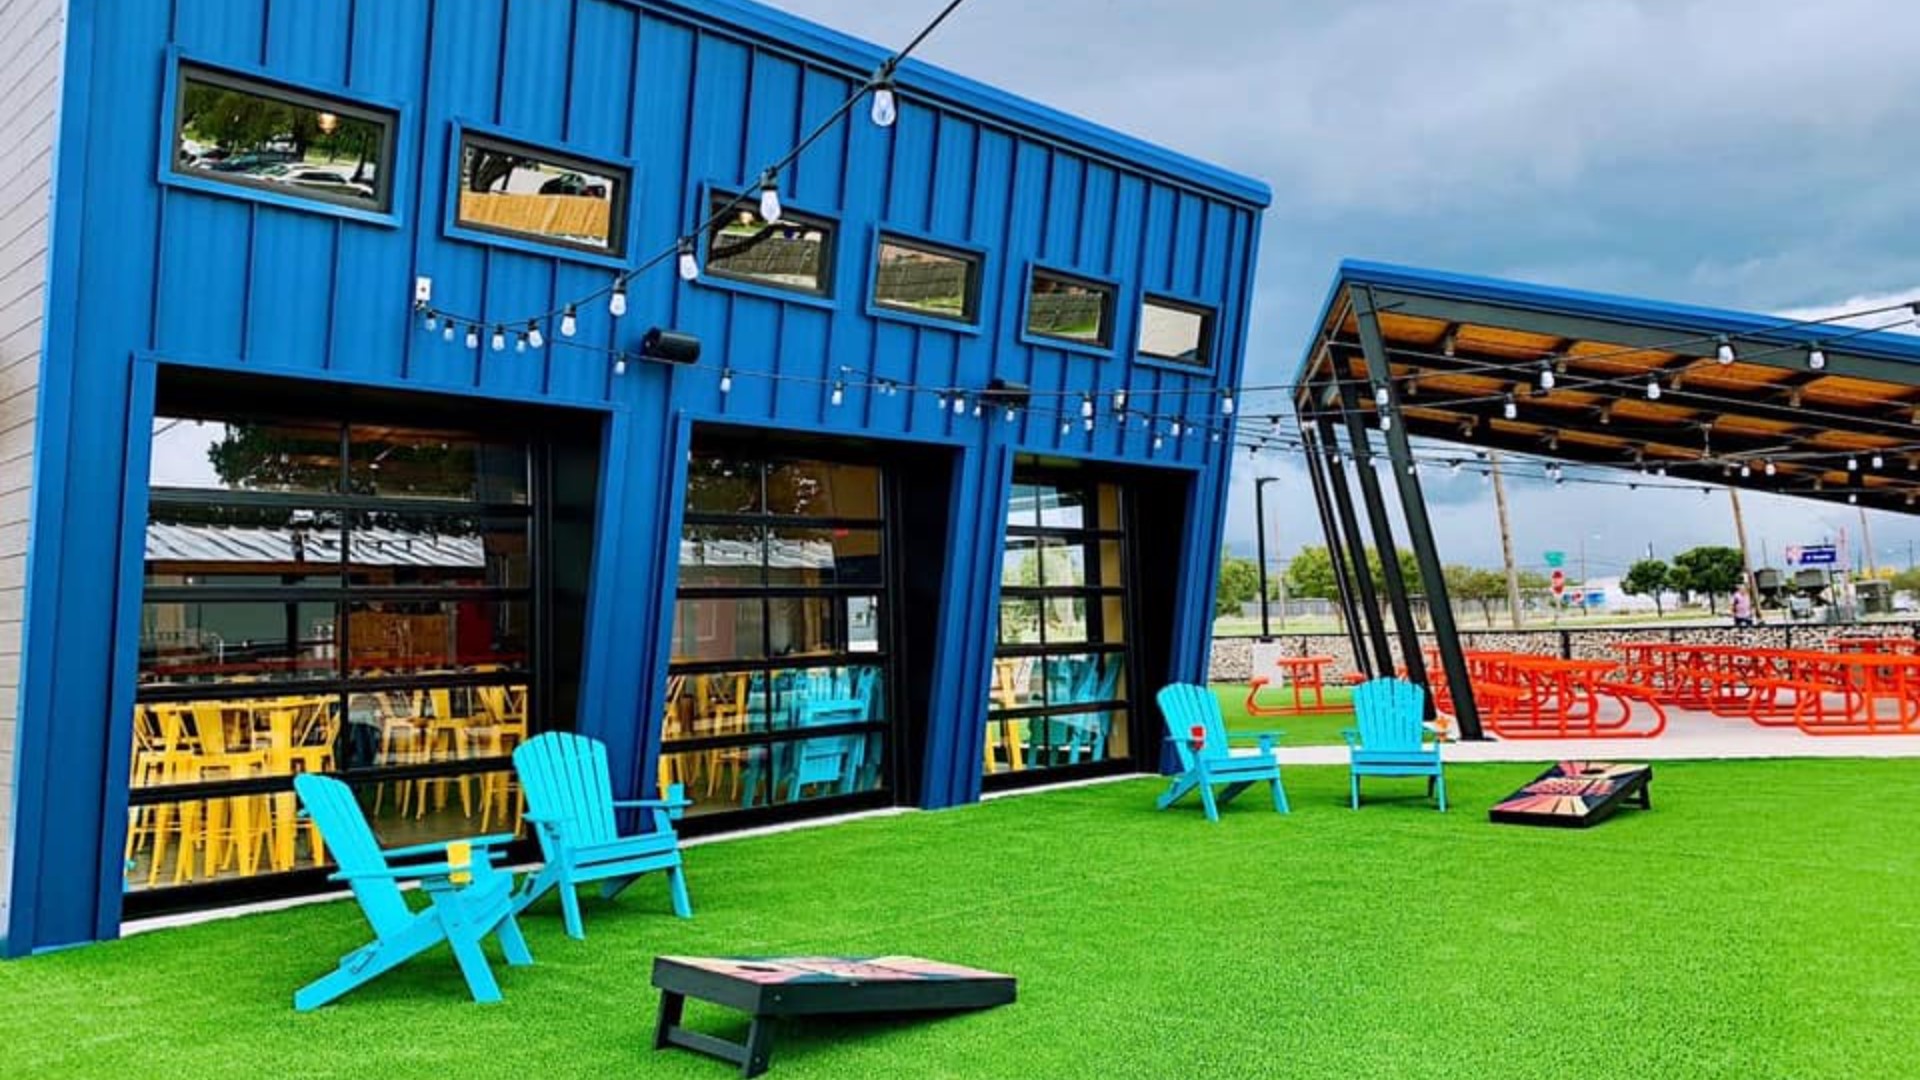 They have different local food trucks, an open air pavilion,  yard games, and craft beer. Local Food truck owners are glad this concept is now in Waco.